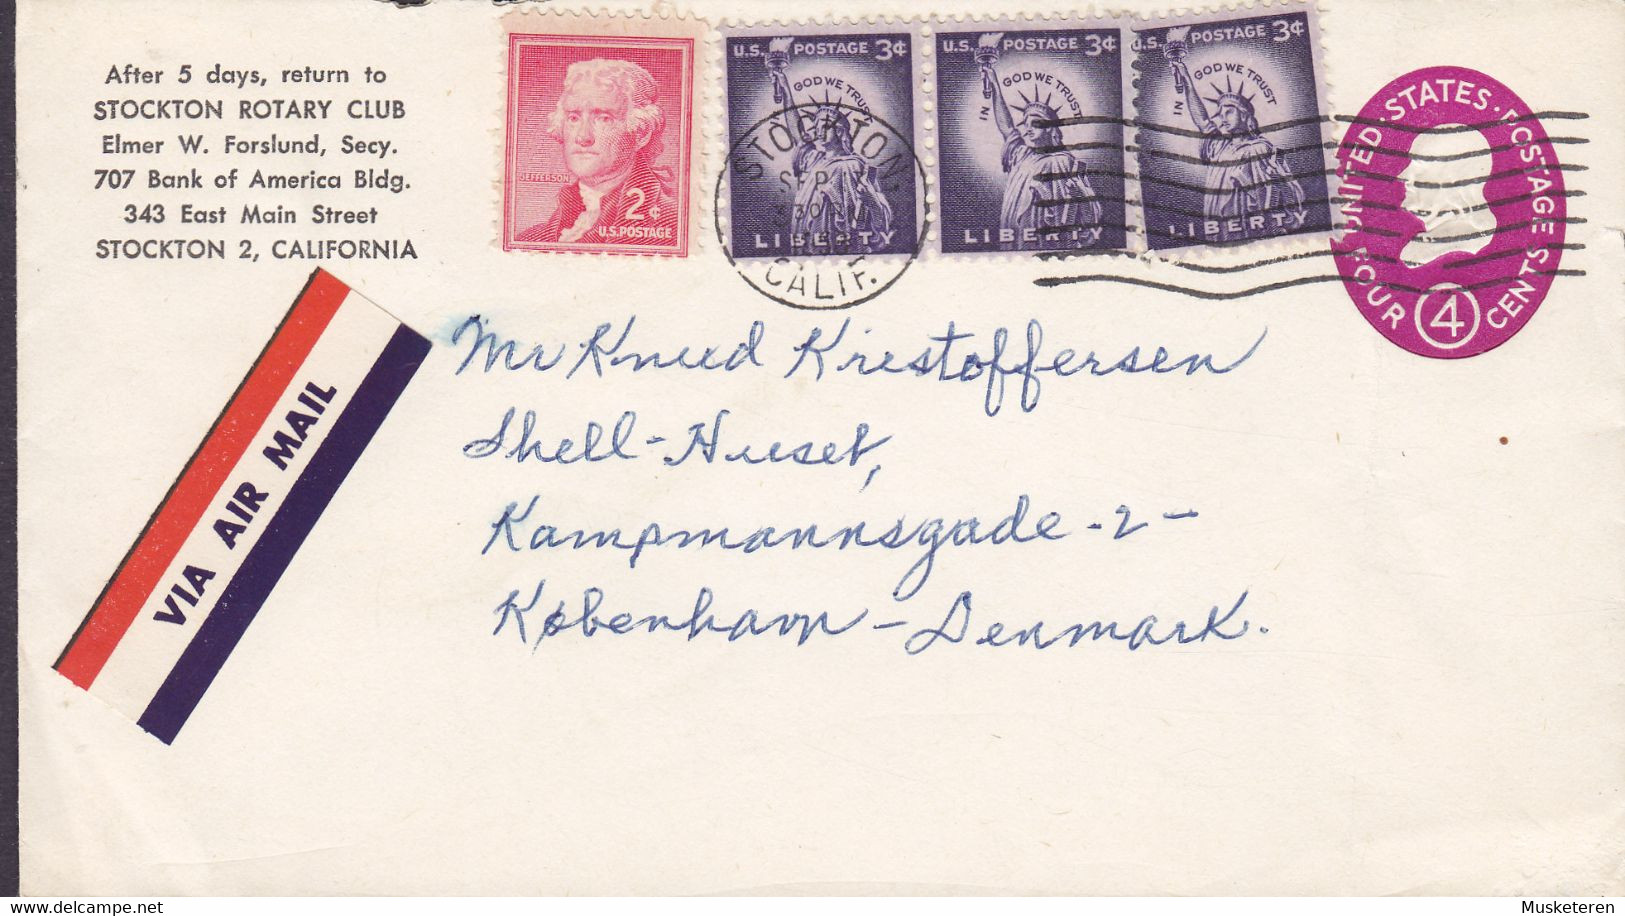 United States Via Air Mail Label Uprated Postal Stationery Ganzsache PRIVATE Print STOCTON ROTARY CLUB 1963 Denmark - 1961-80